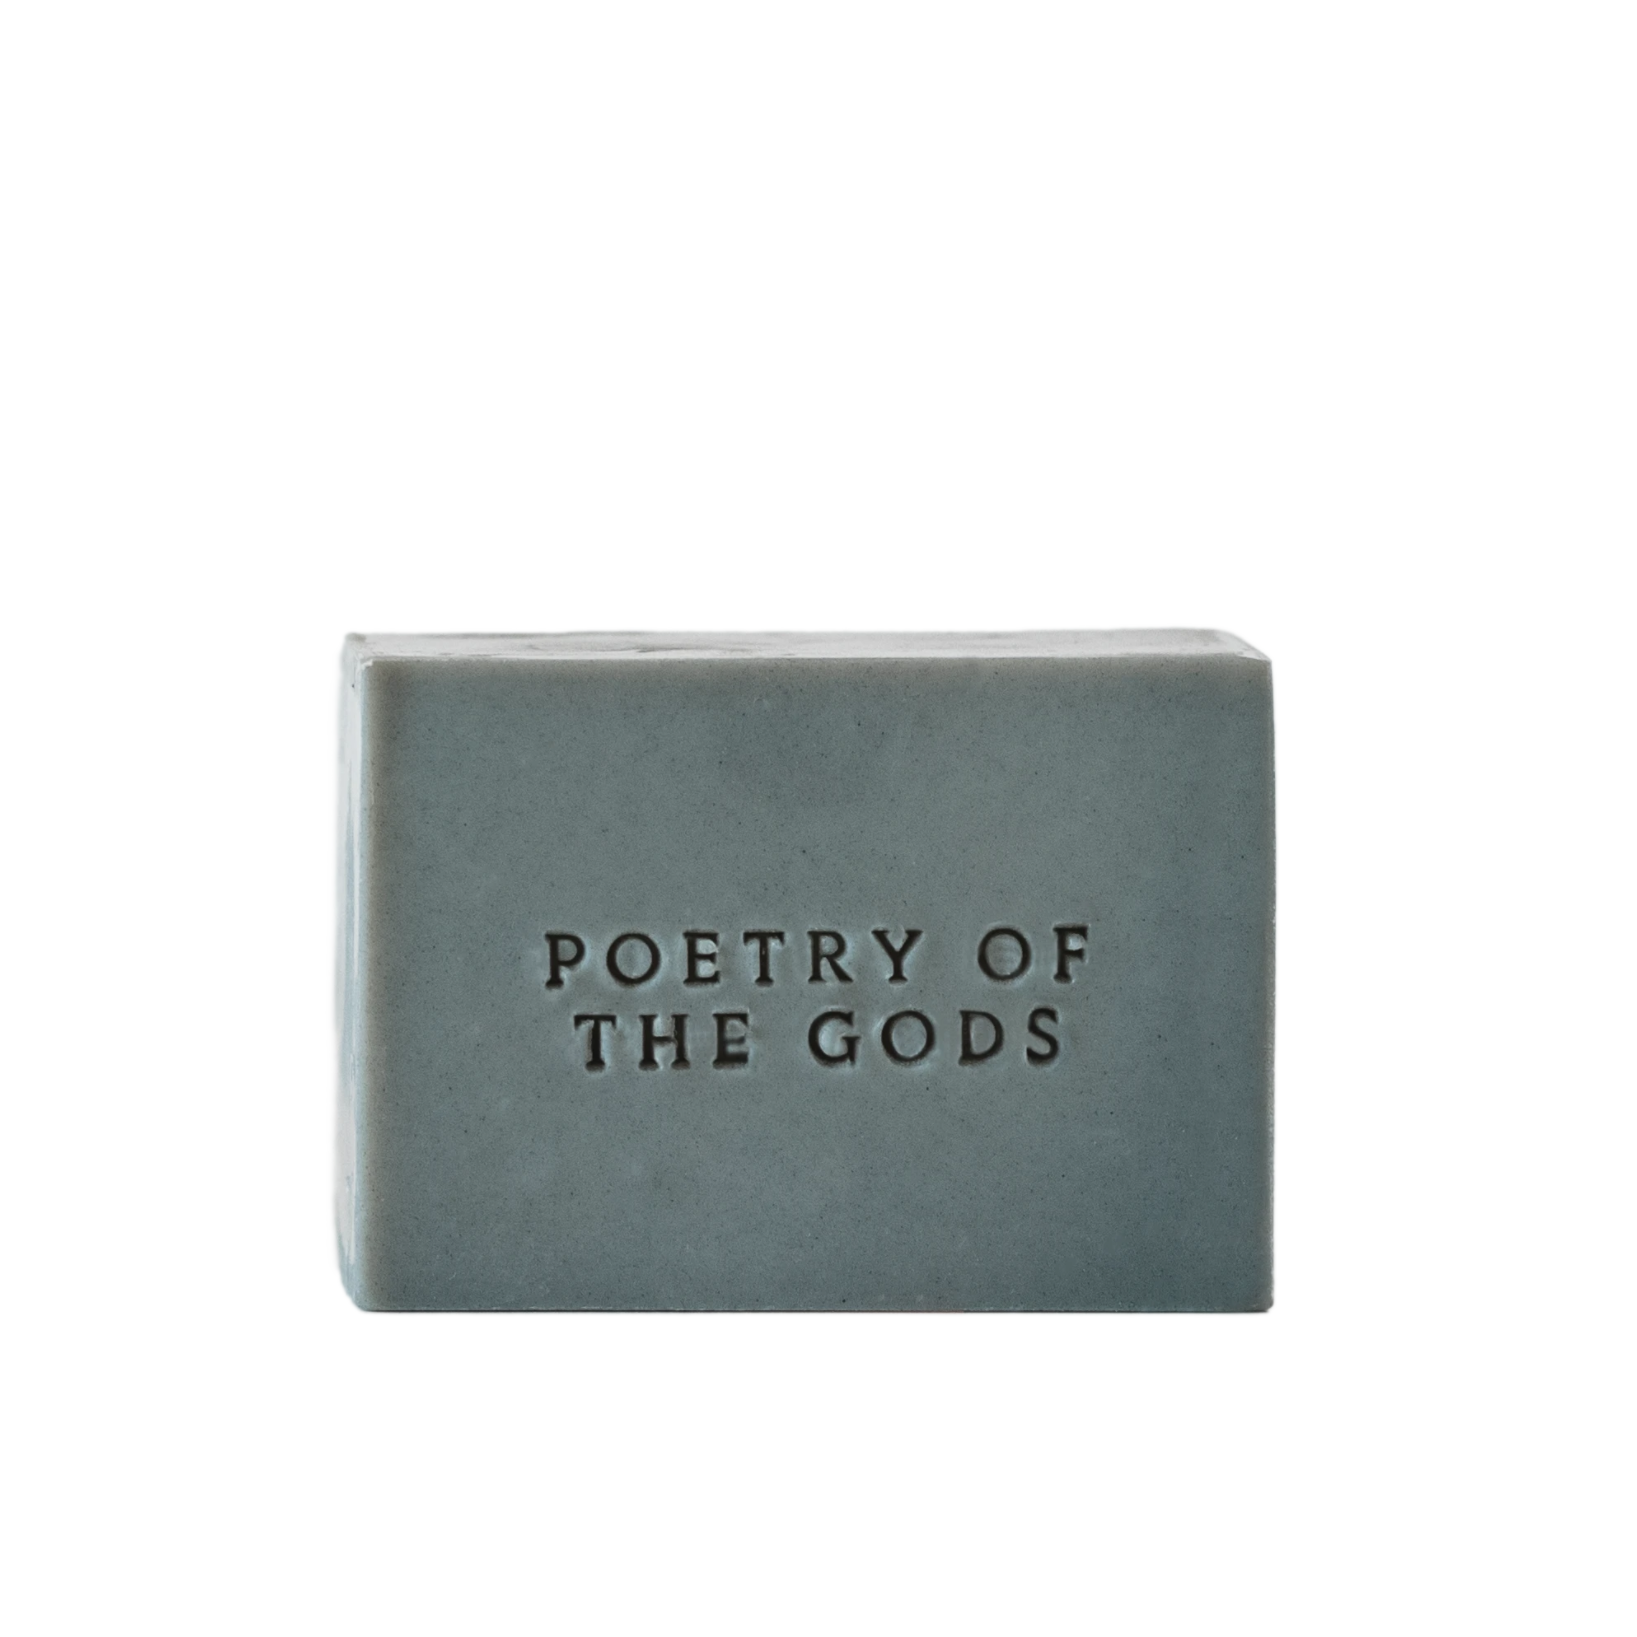 Poetry of the Gods Soap Bar | charcoal + white clay with scent of mandarin and cedarwood